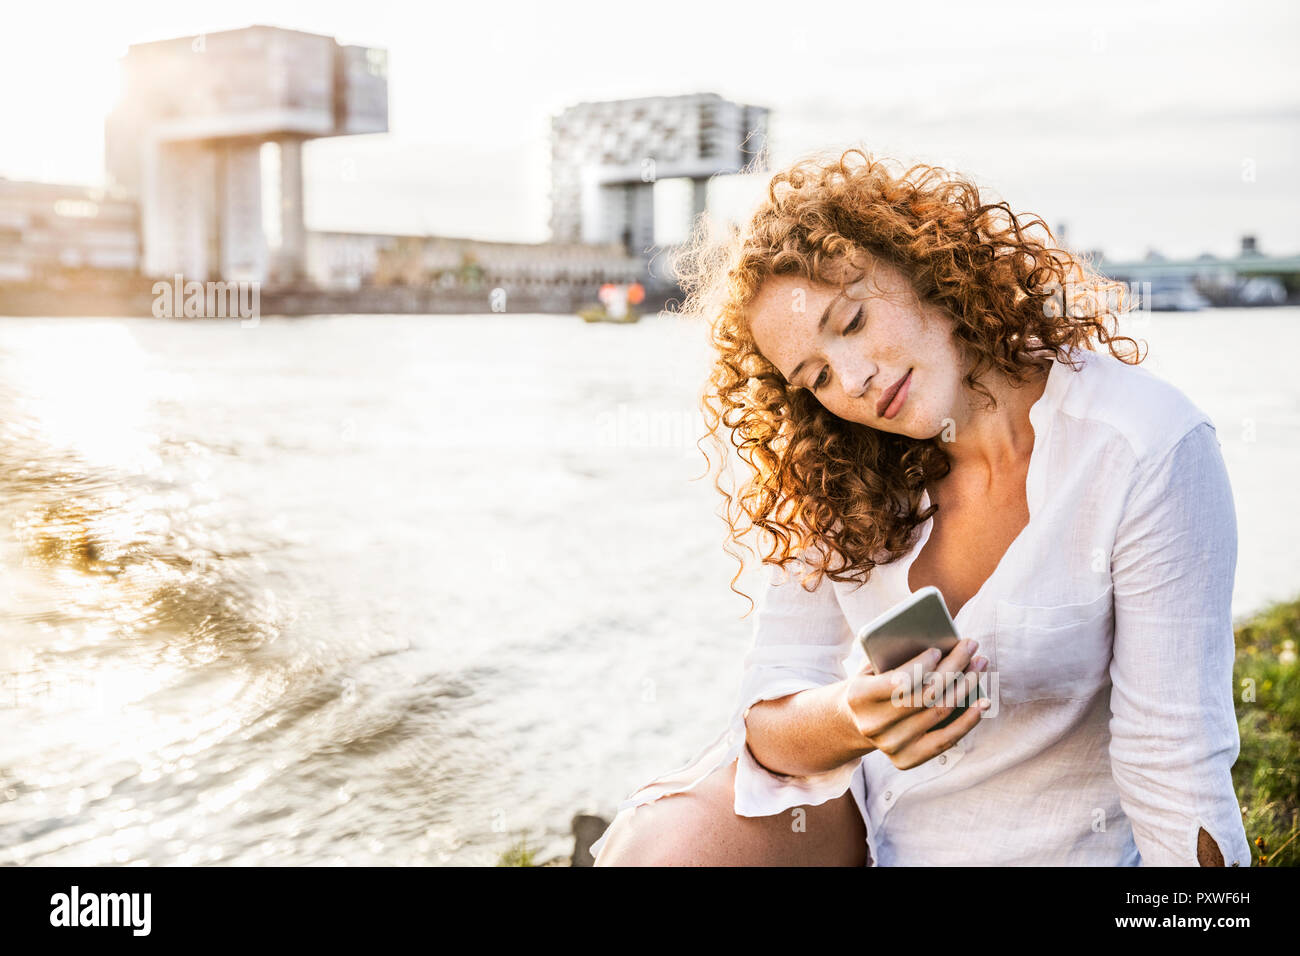 Germany, Cologne, portrait of young woman sitting at riverside looking at cell phone Stock Photo